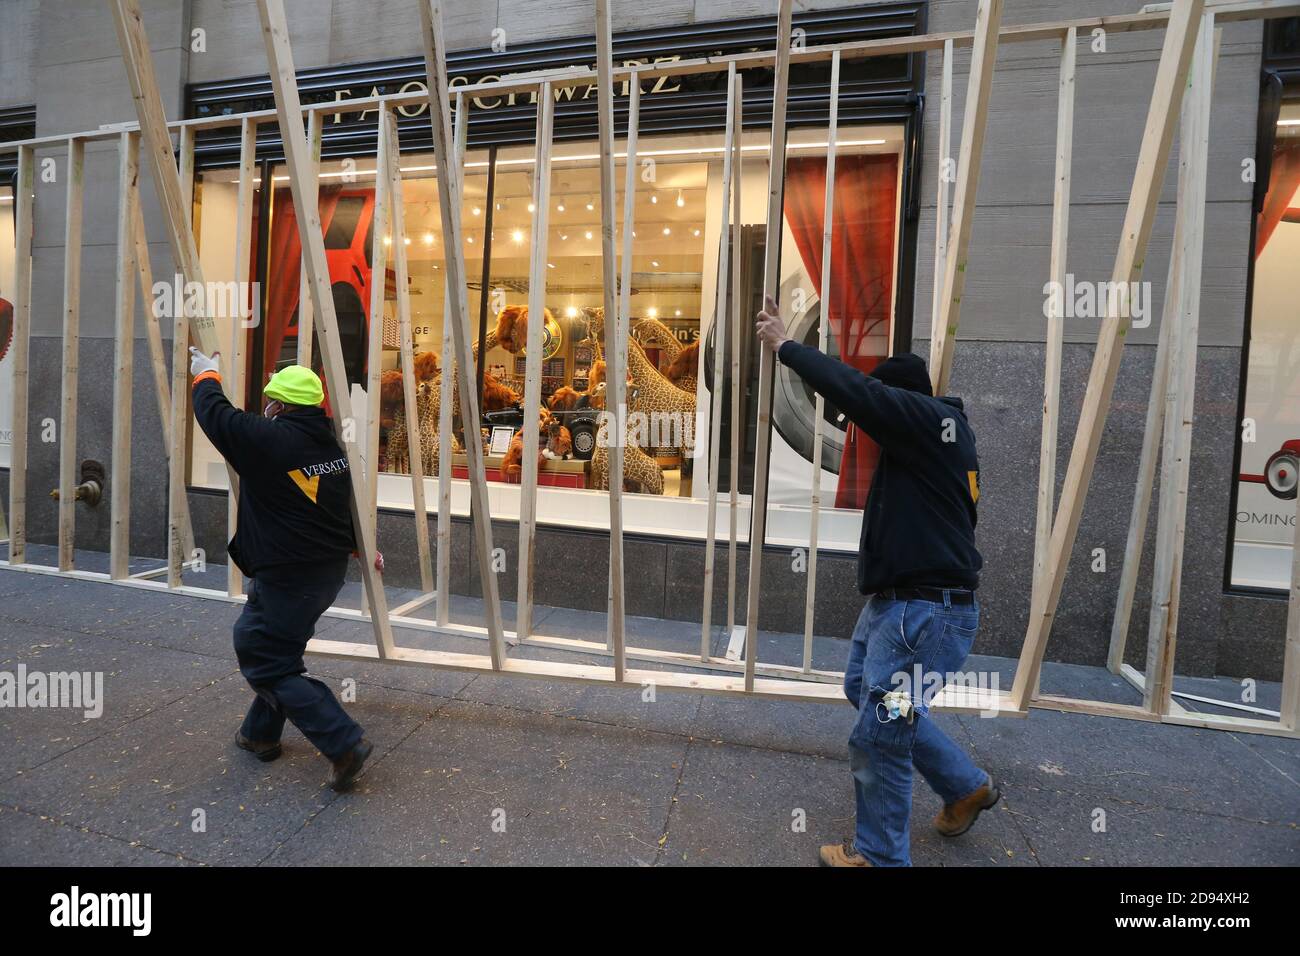 New York, NY, USA. 2nd Nov, 2020. Nov 2, 2020 : New York Stores prepare for possible unrest surrounding election day. The FAO Schwartz Store at Rockefeller Center is boarded up, Credit: Dan Herrick/ZUMA Wire/Alamy Live News Stock Photo